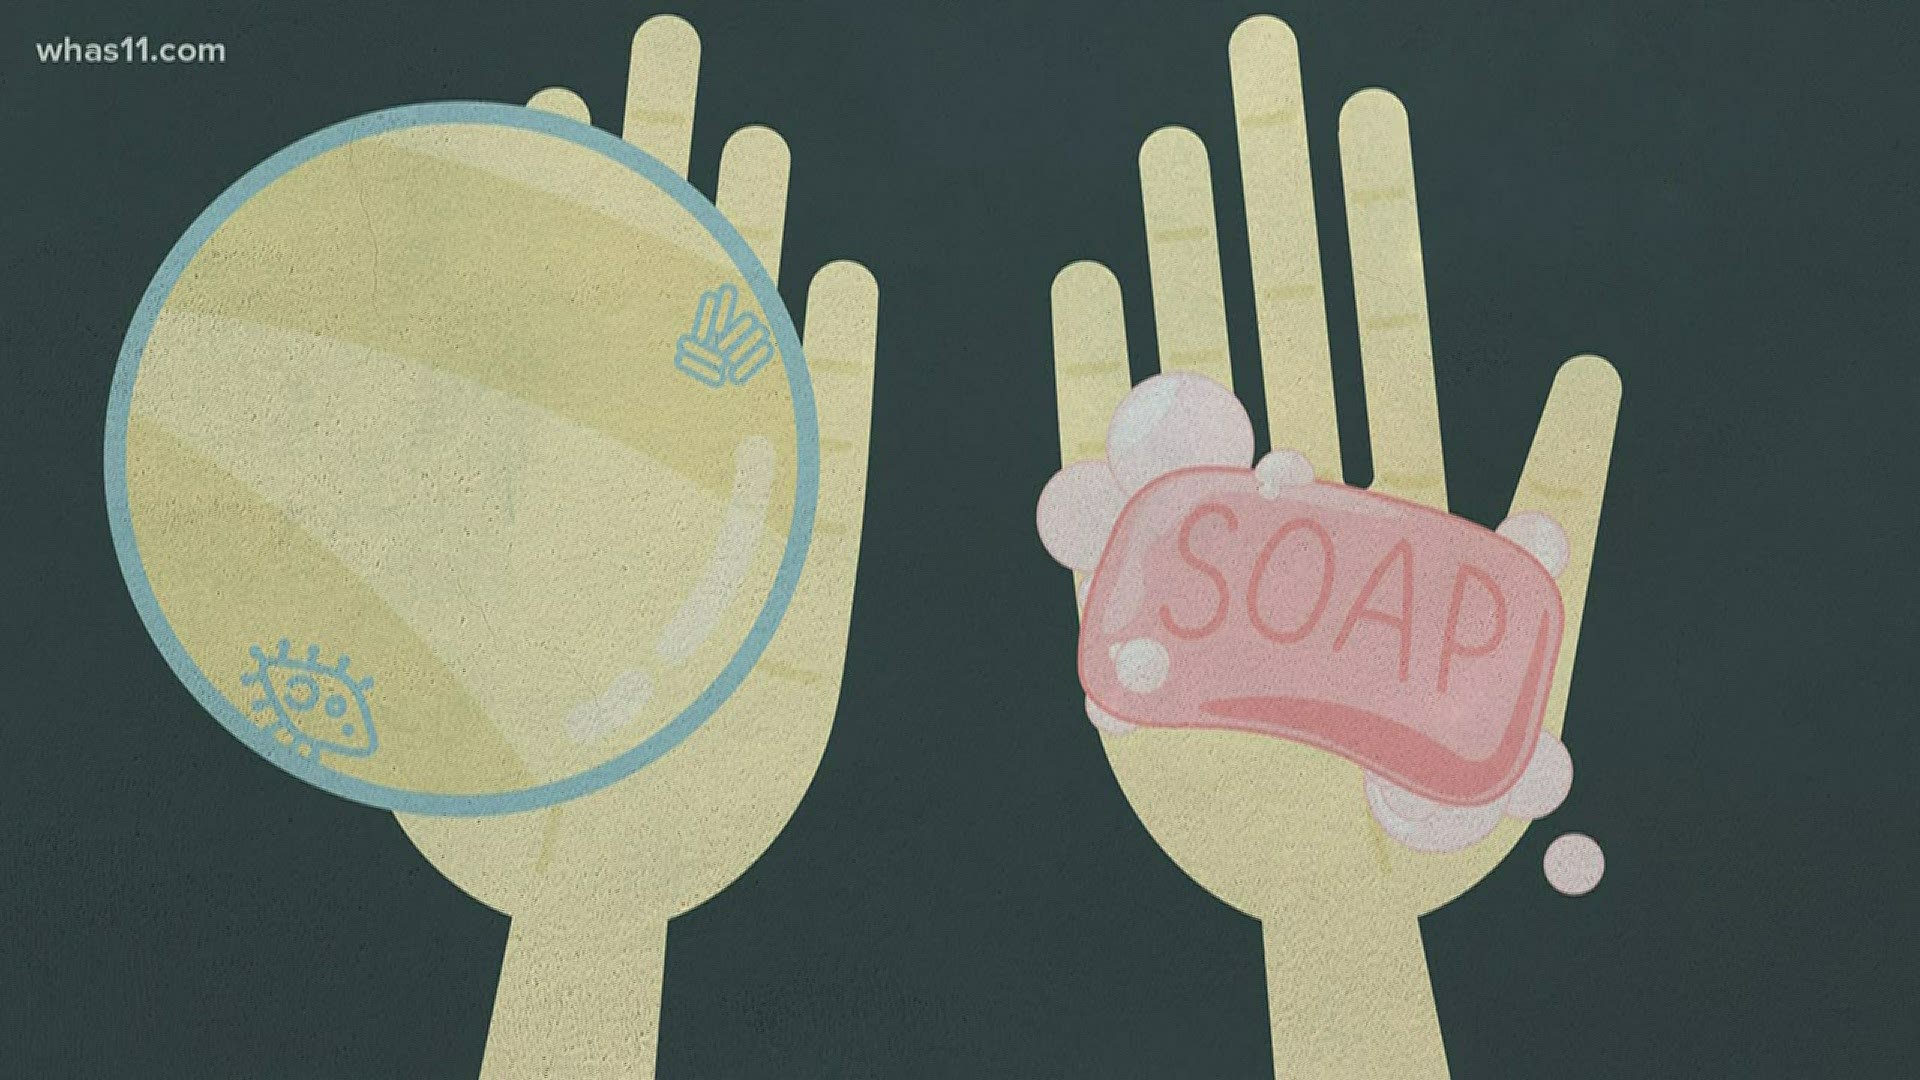 WHAS11's Rob Harris delves into soap and how it important is it to wash your hands.